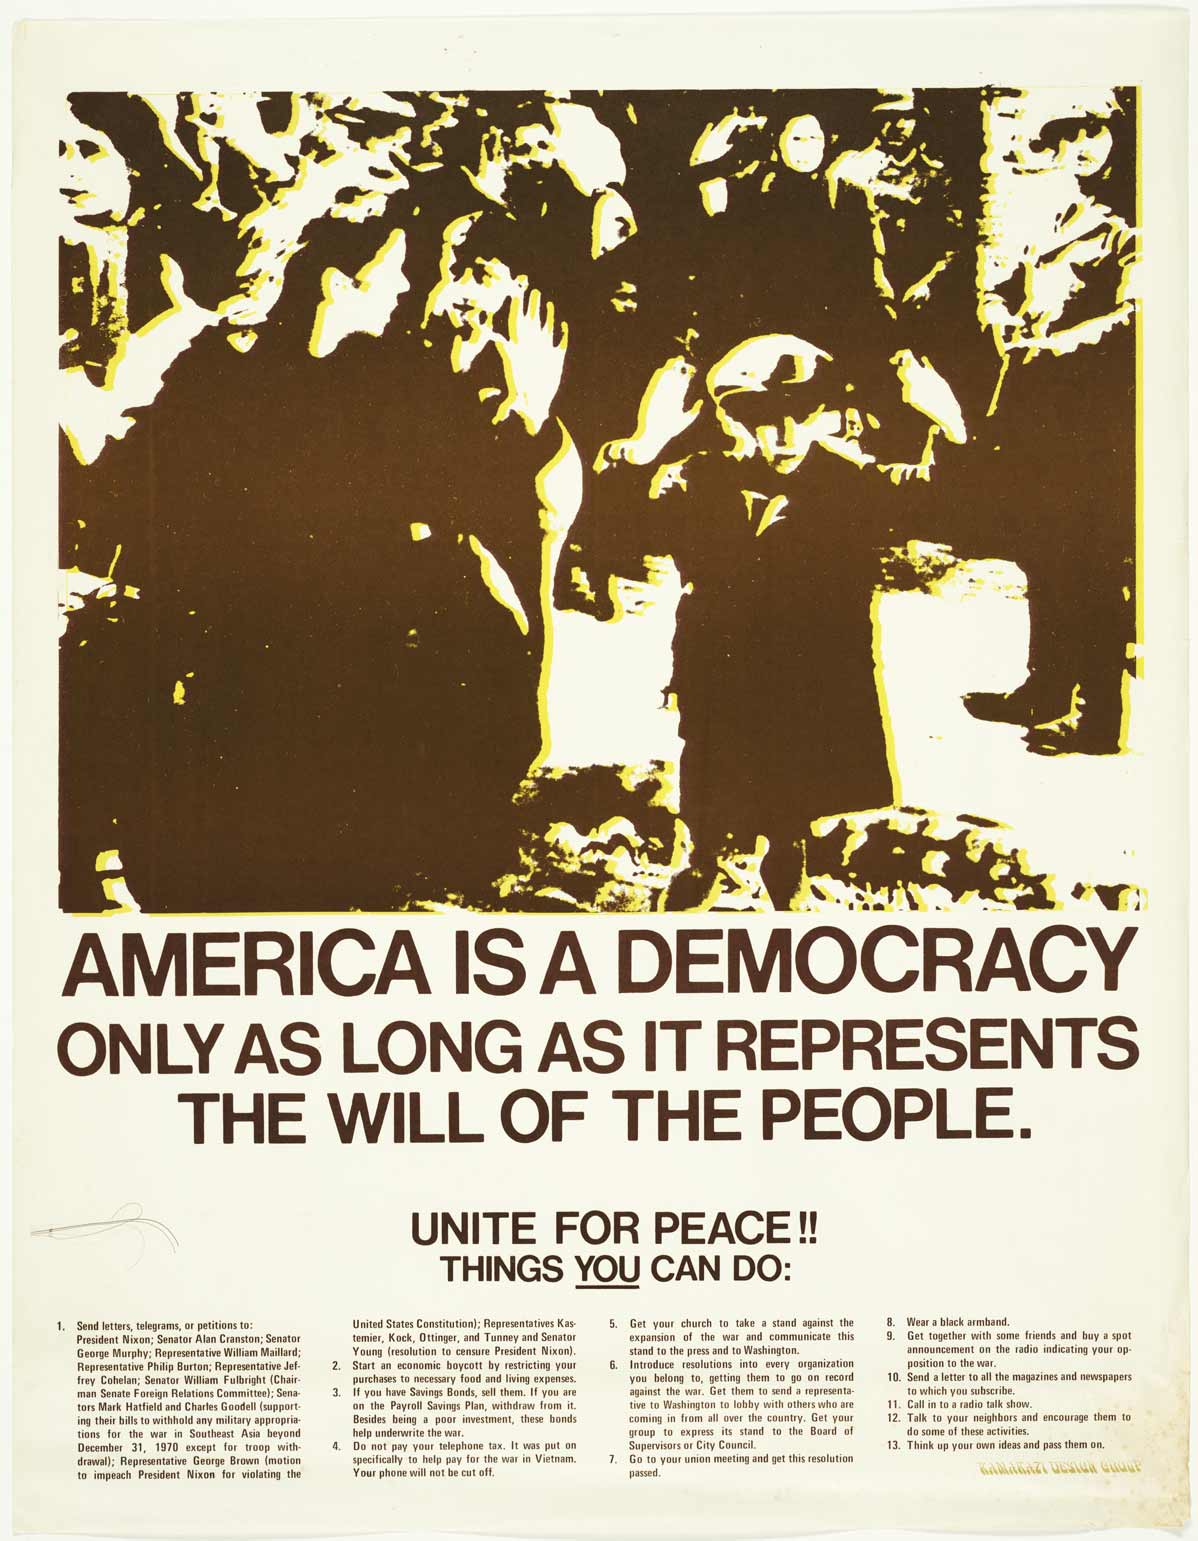 “America is a democracy only as long as it represents the will of the people. Unite for peace!!” | 1970 | Thomas W. Benson papers, 1962-2012 (06352) | Historical Collections and Labor Archives, Eberly Family Special Collections Library, Penn State University Libraries